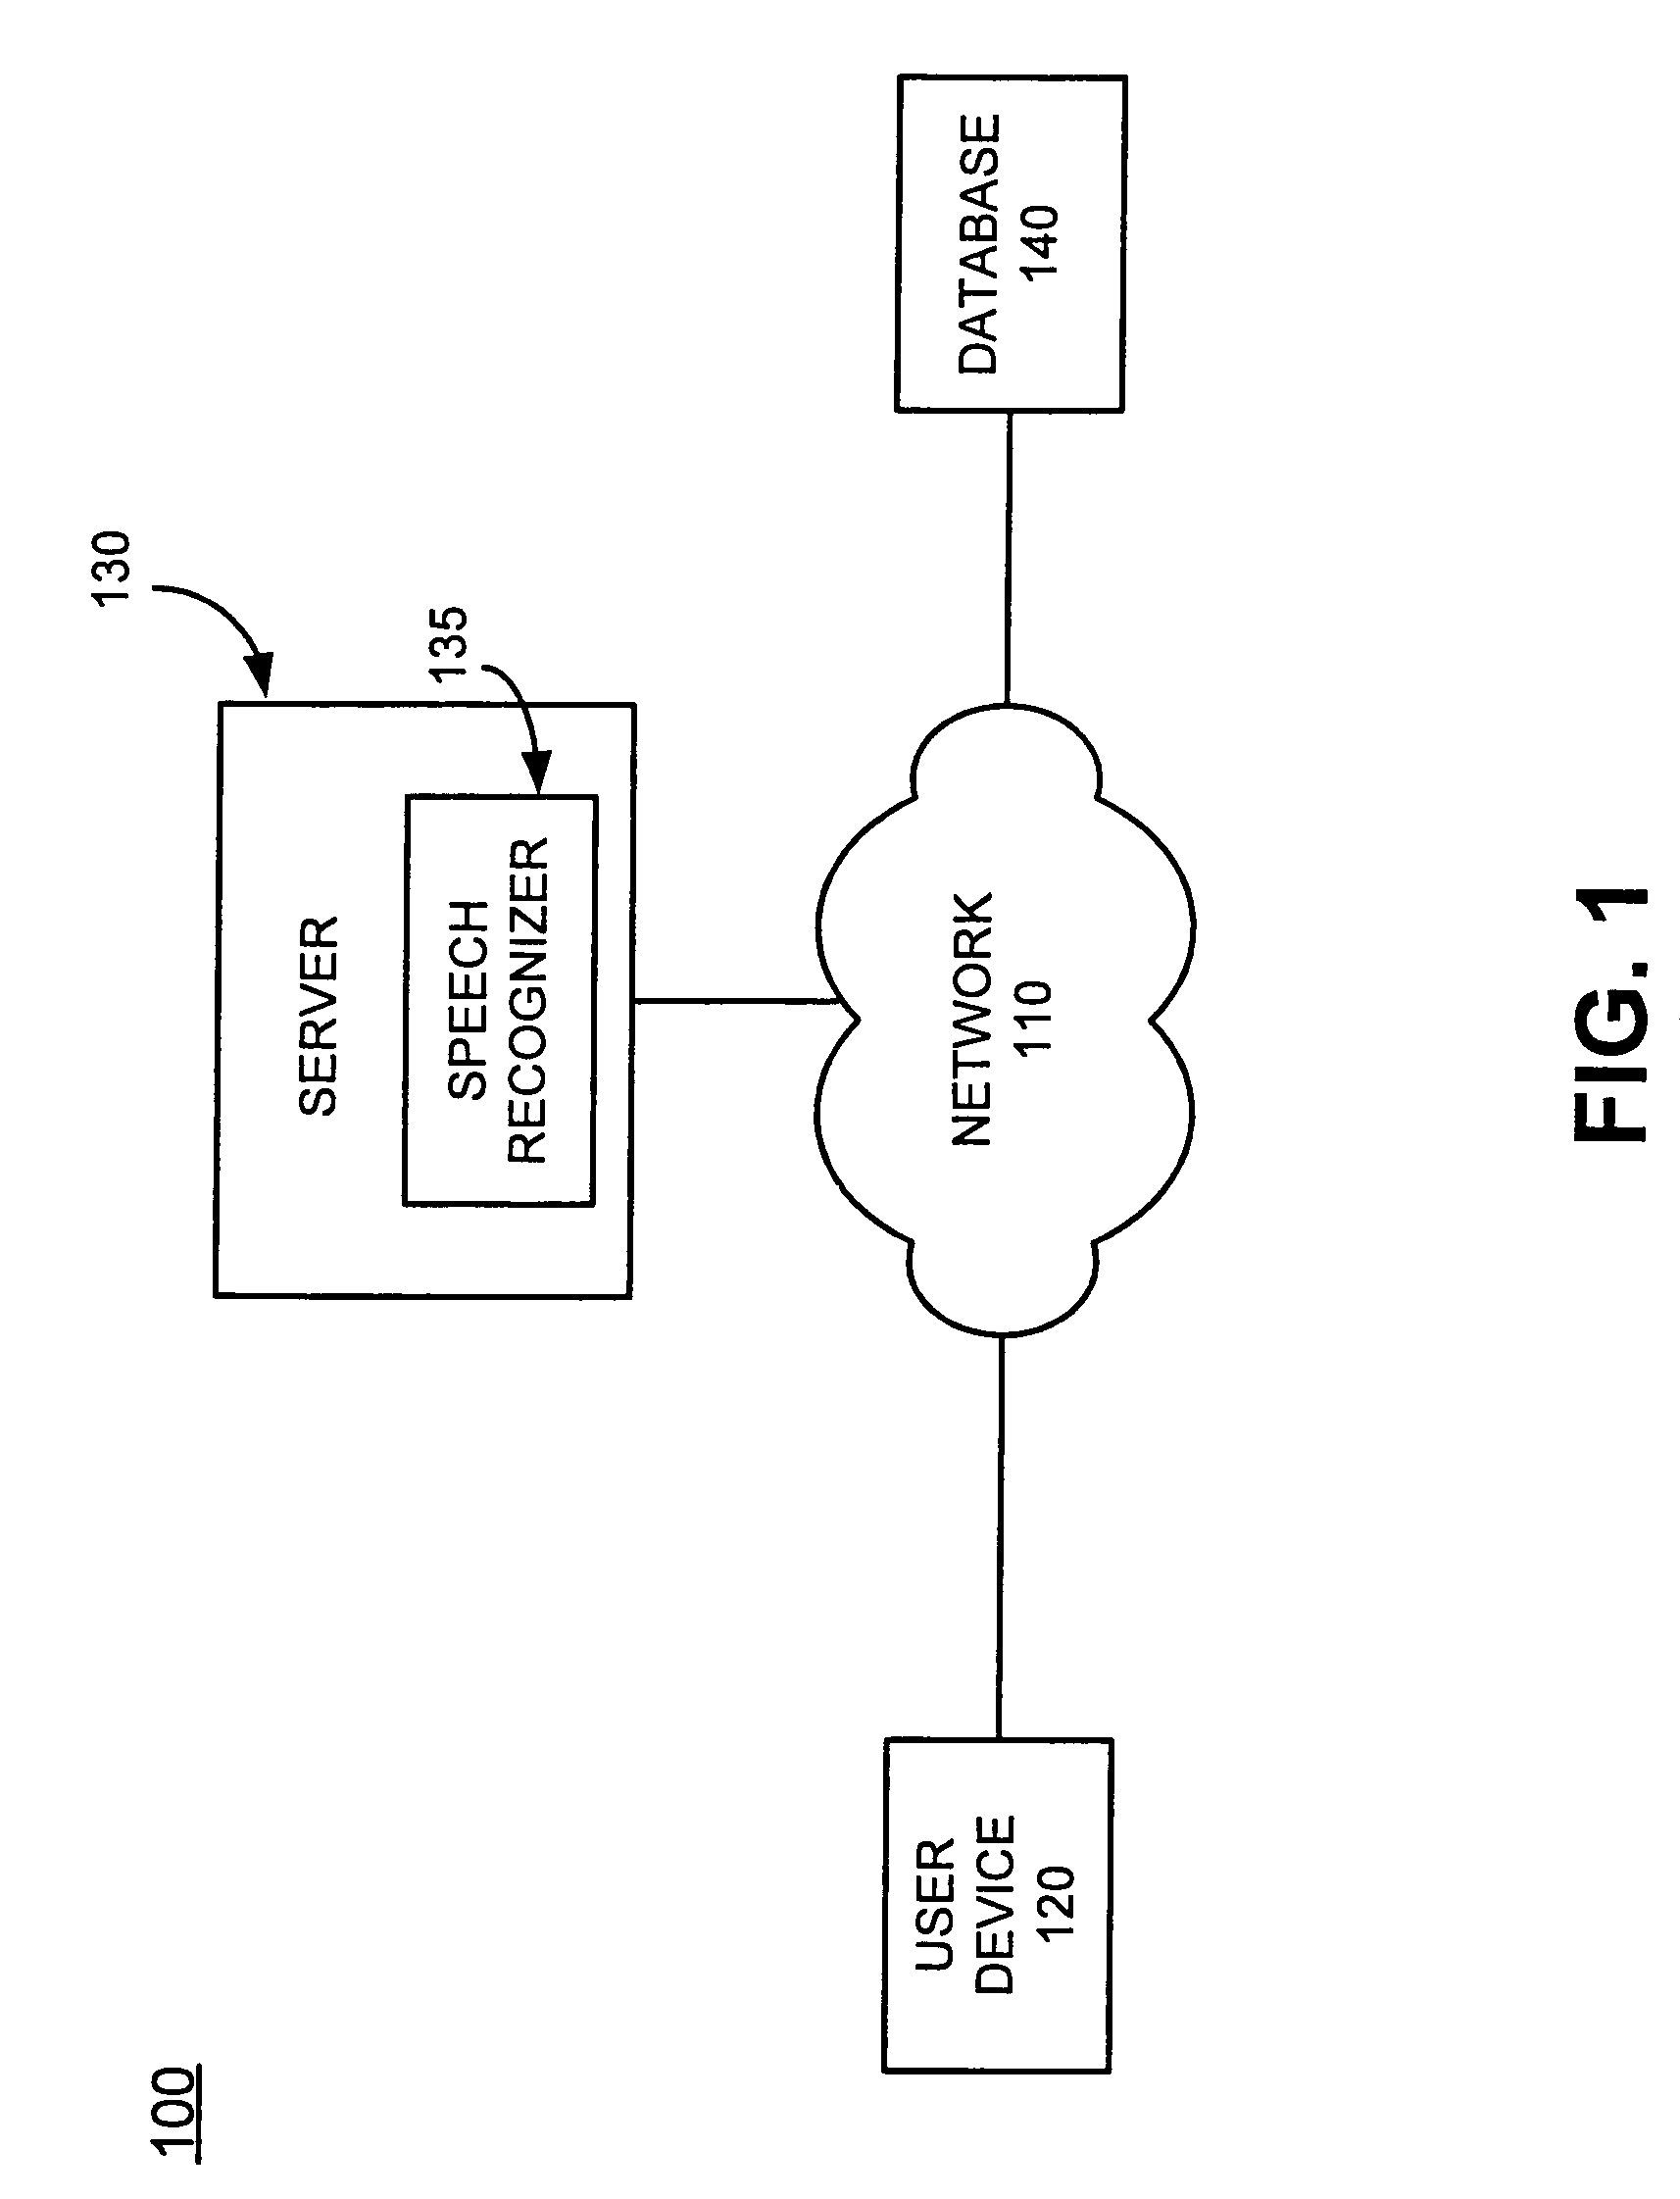 Systems and methods for gathering information